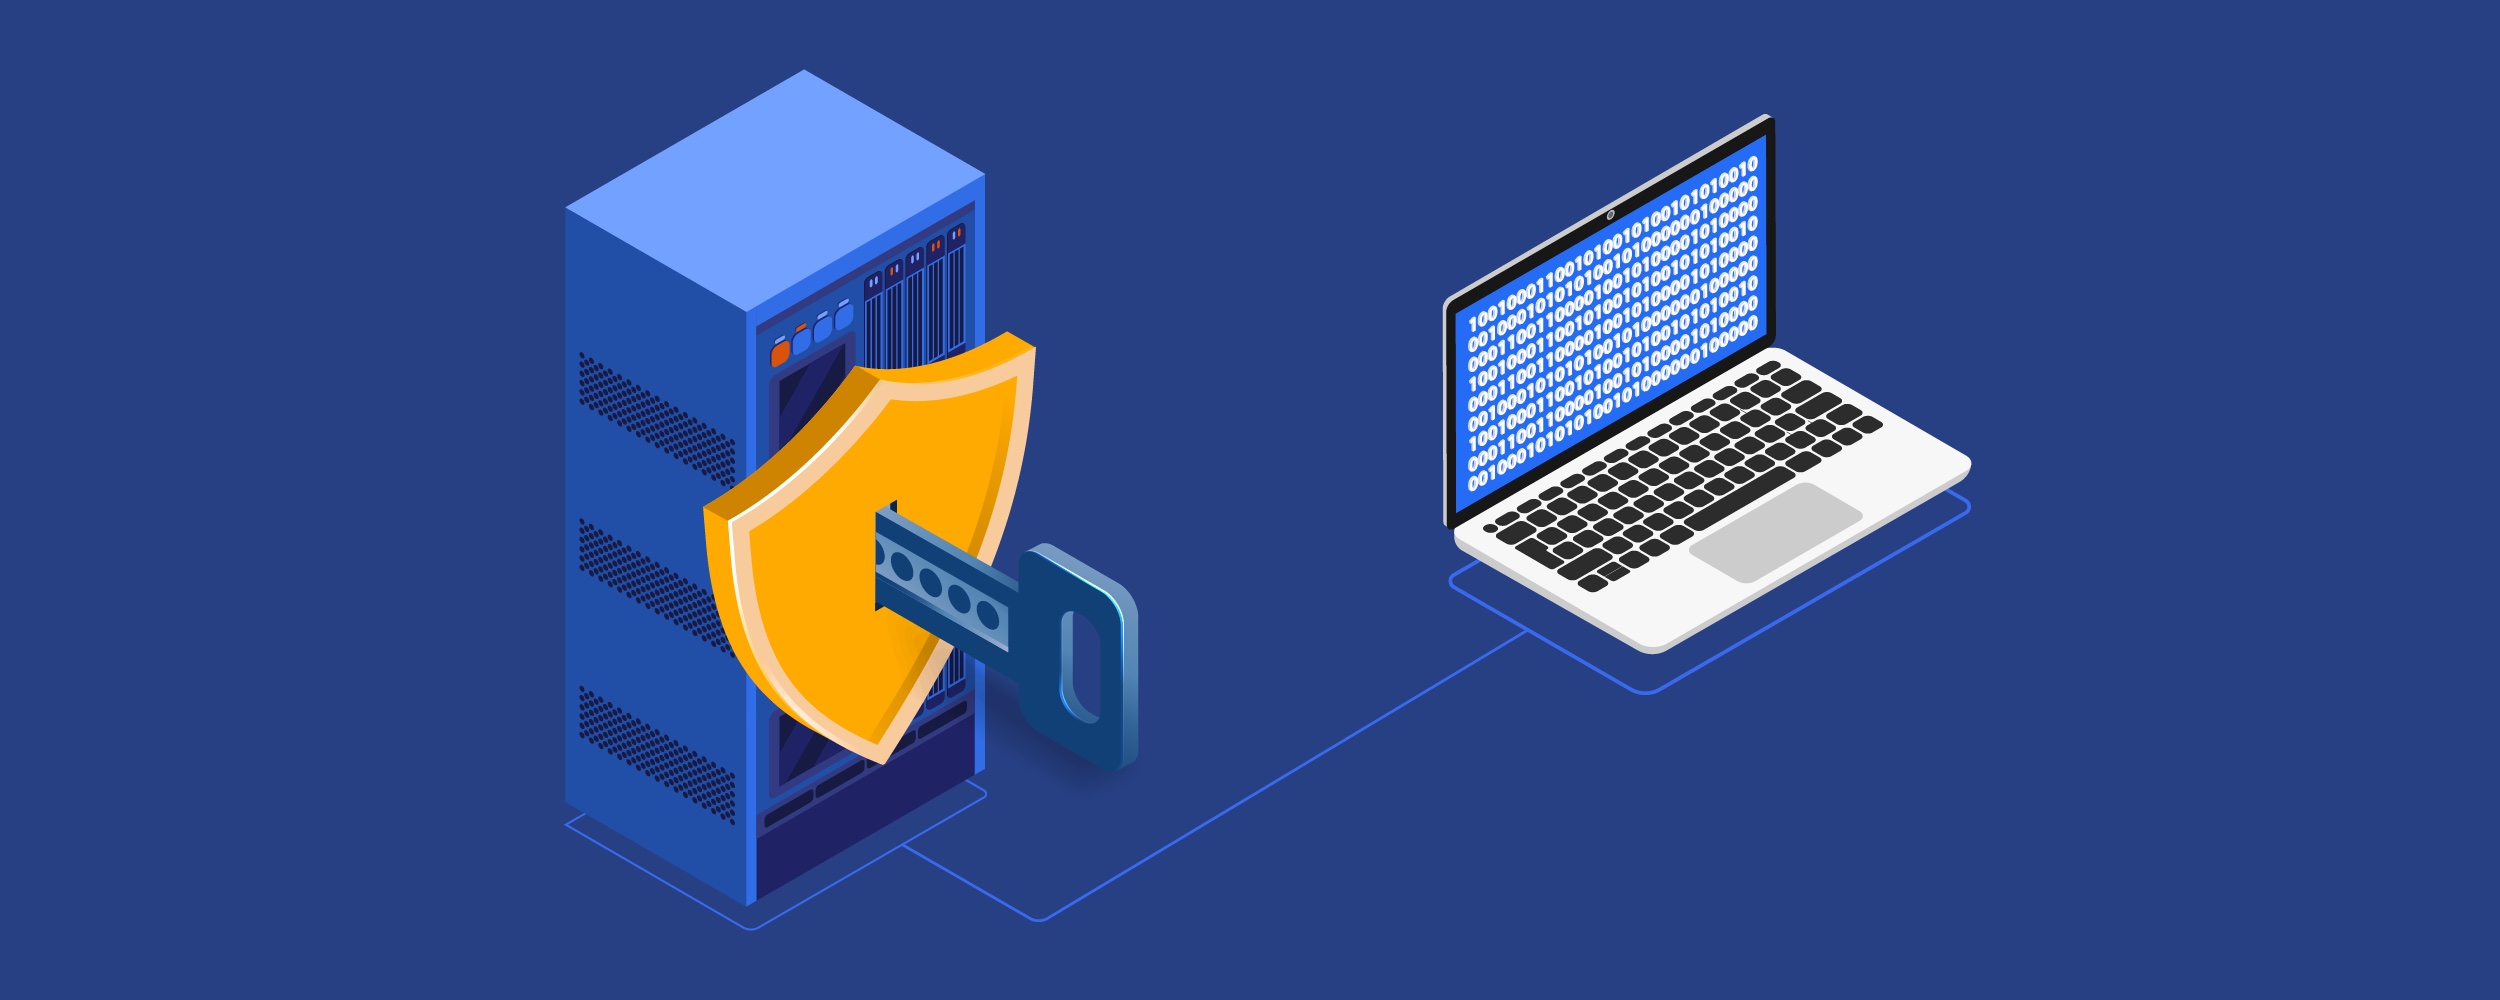 File Server Security (Part 1) – Securing your Windows File Servers